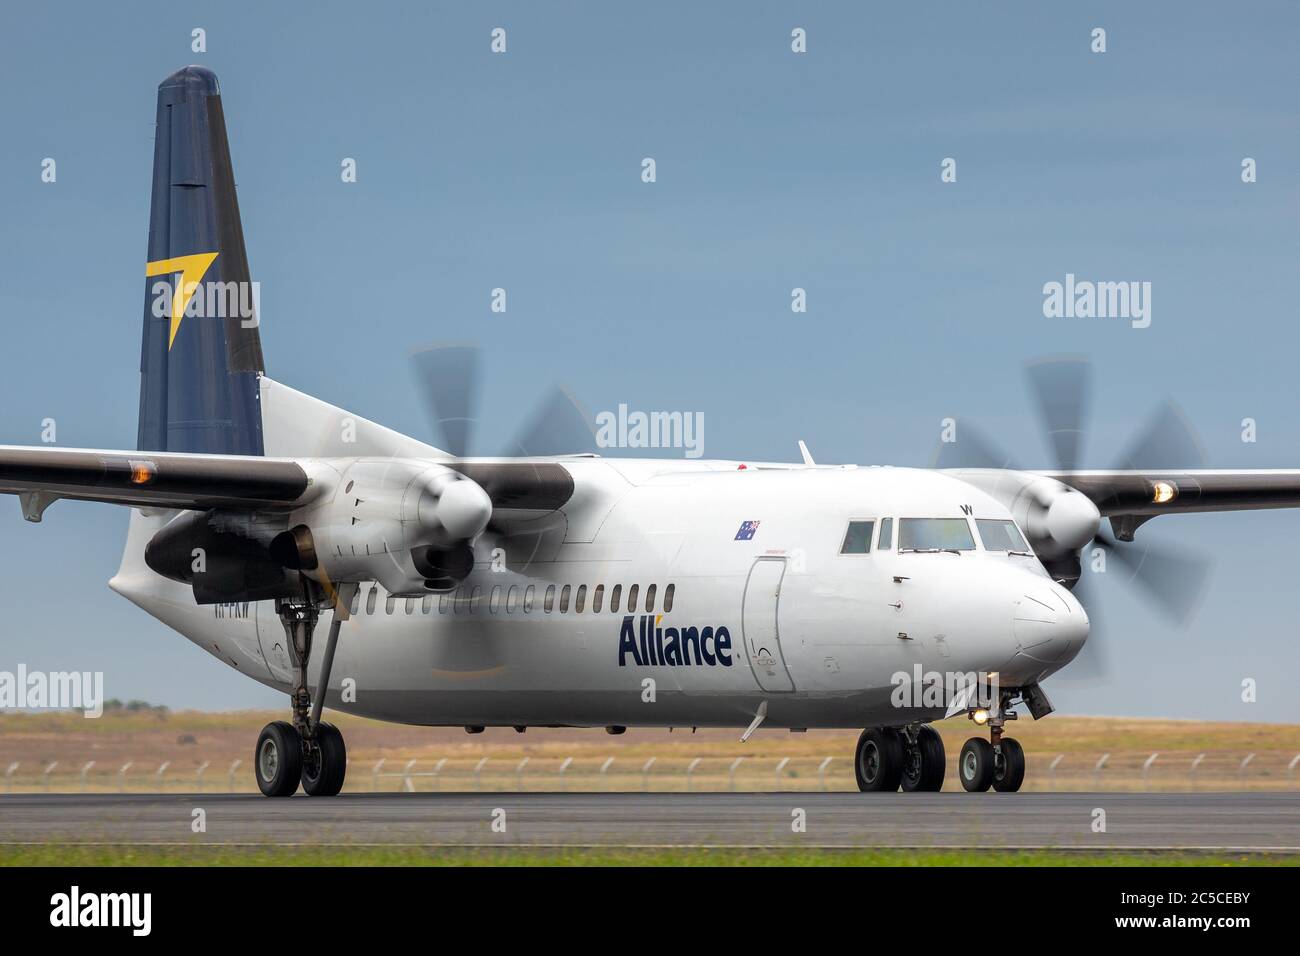 Alliance airlines Fokker 50 regional airliner aircraft taxiing at Avalon Airport. Stock Photo